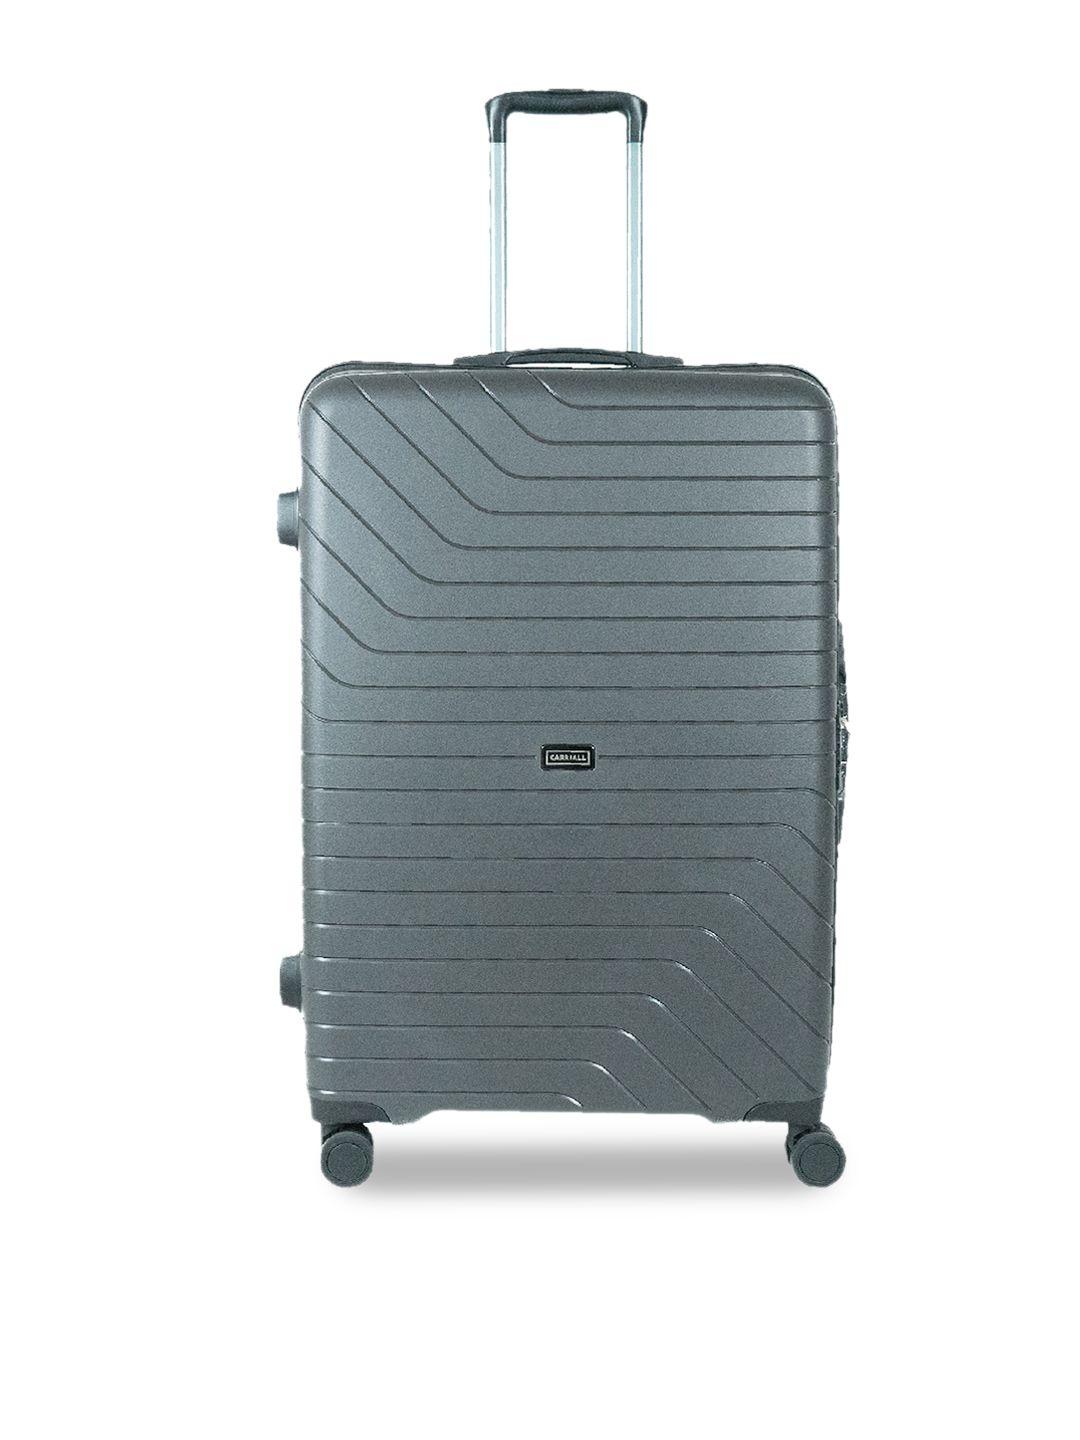 carriall striped hard sided large trolley suitcase